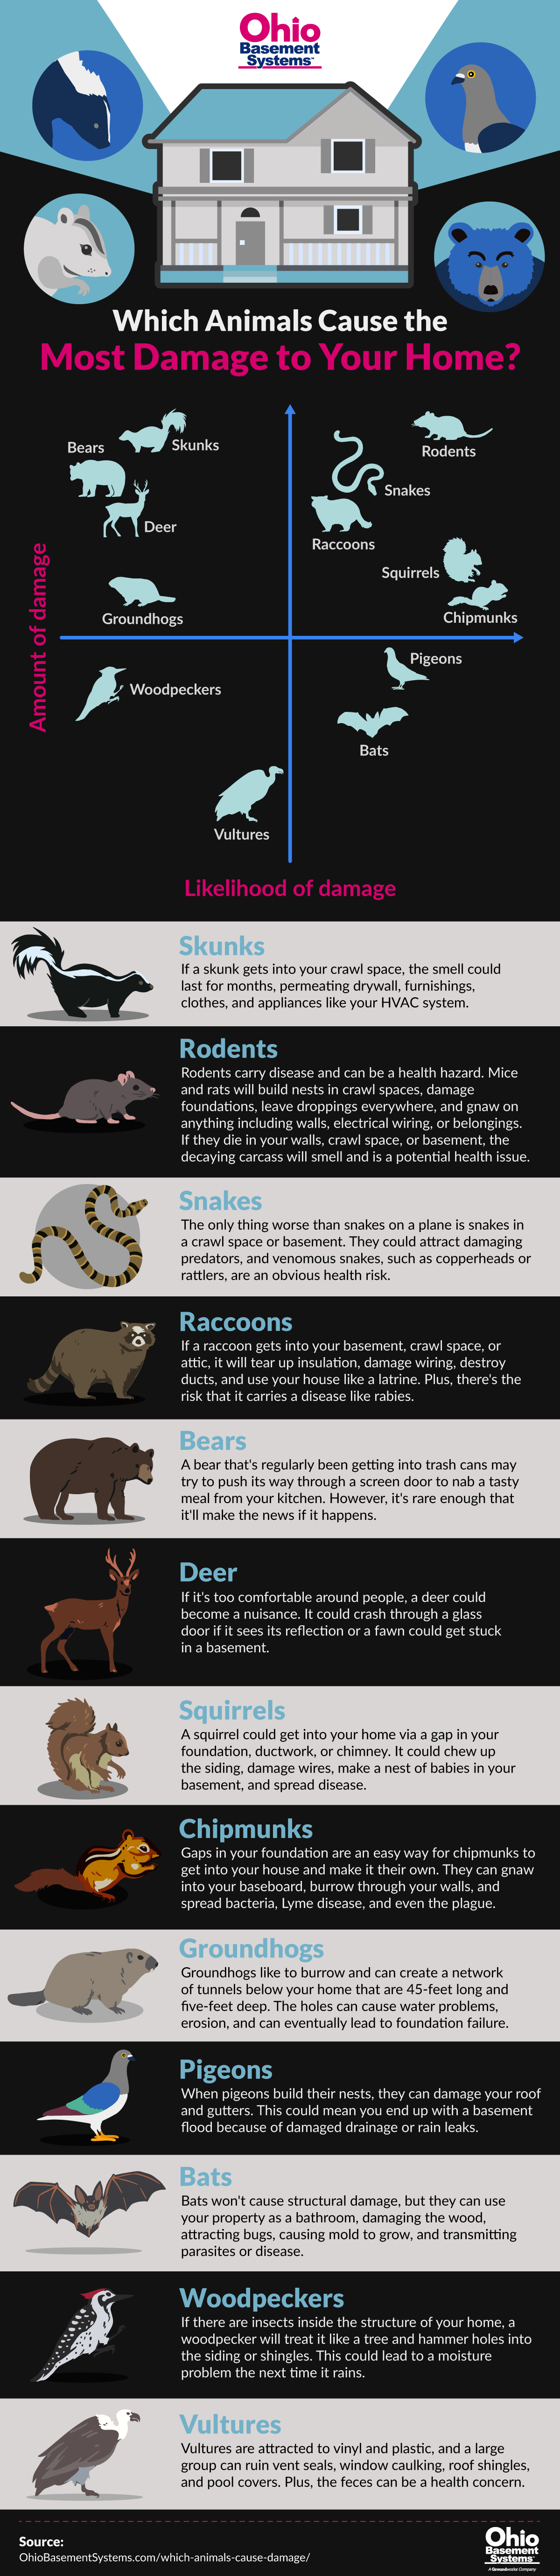 which-animals-cause-damage-infographic-ohio-basement-systems